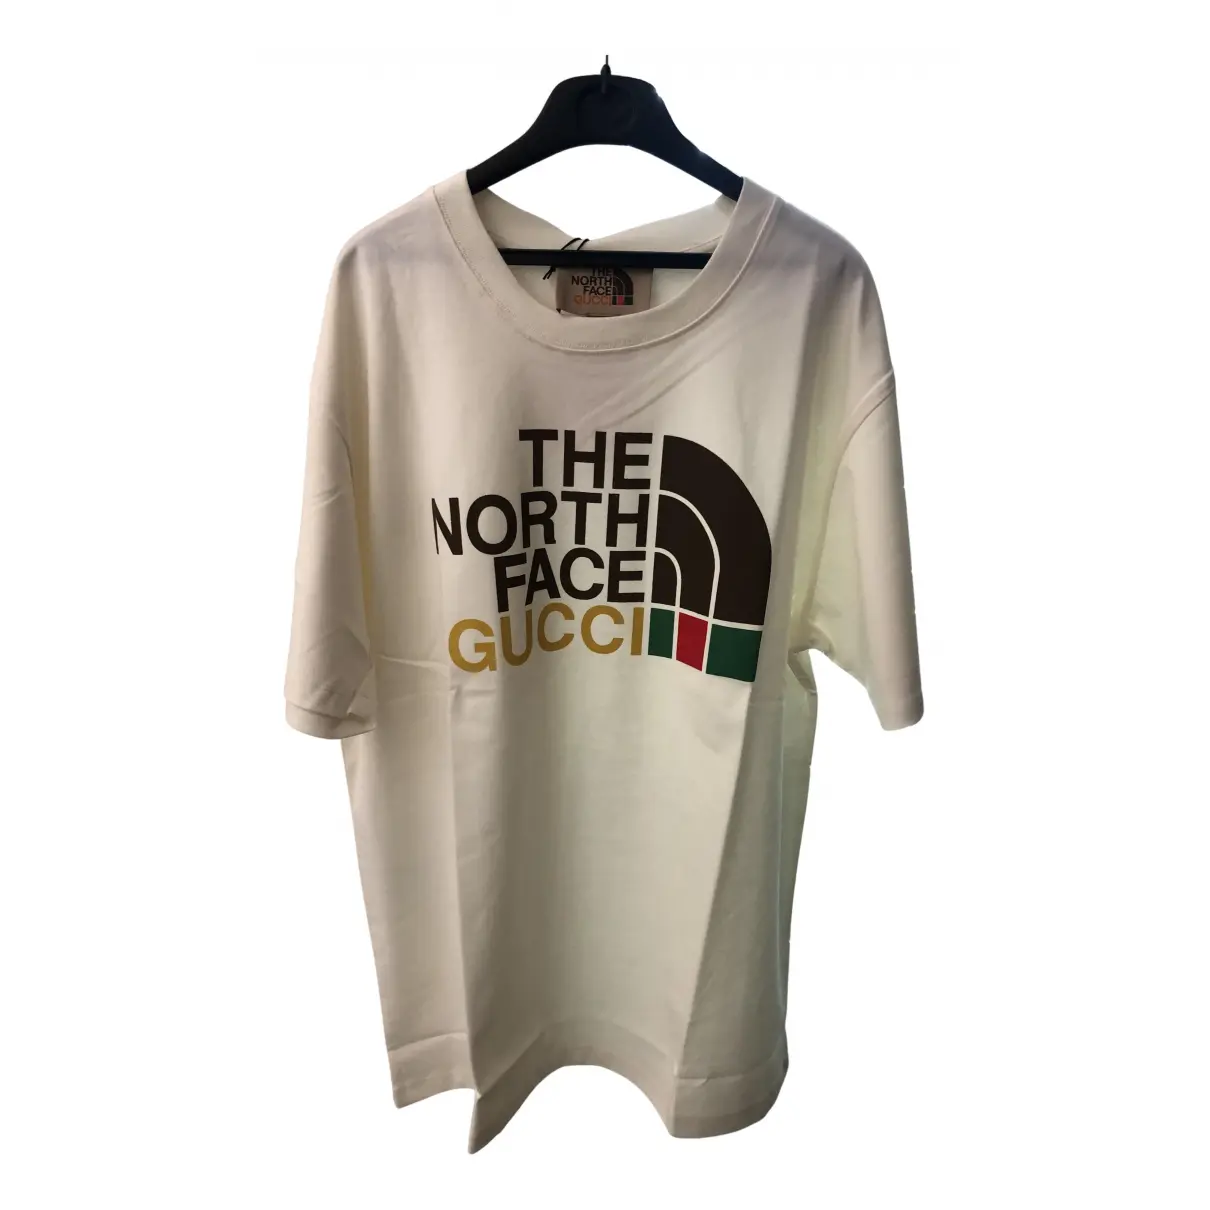 White Cotton T-shirt The North Face x Gucci